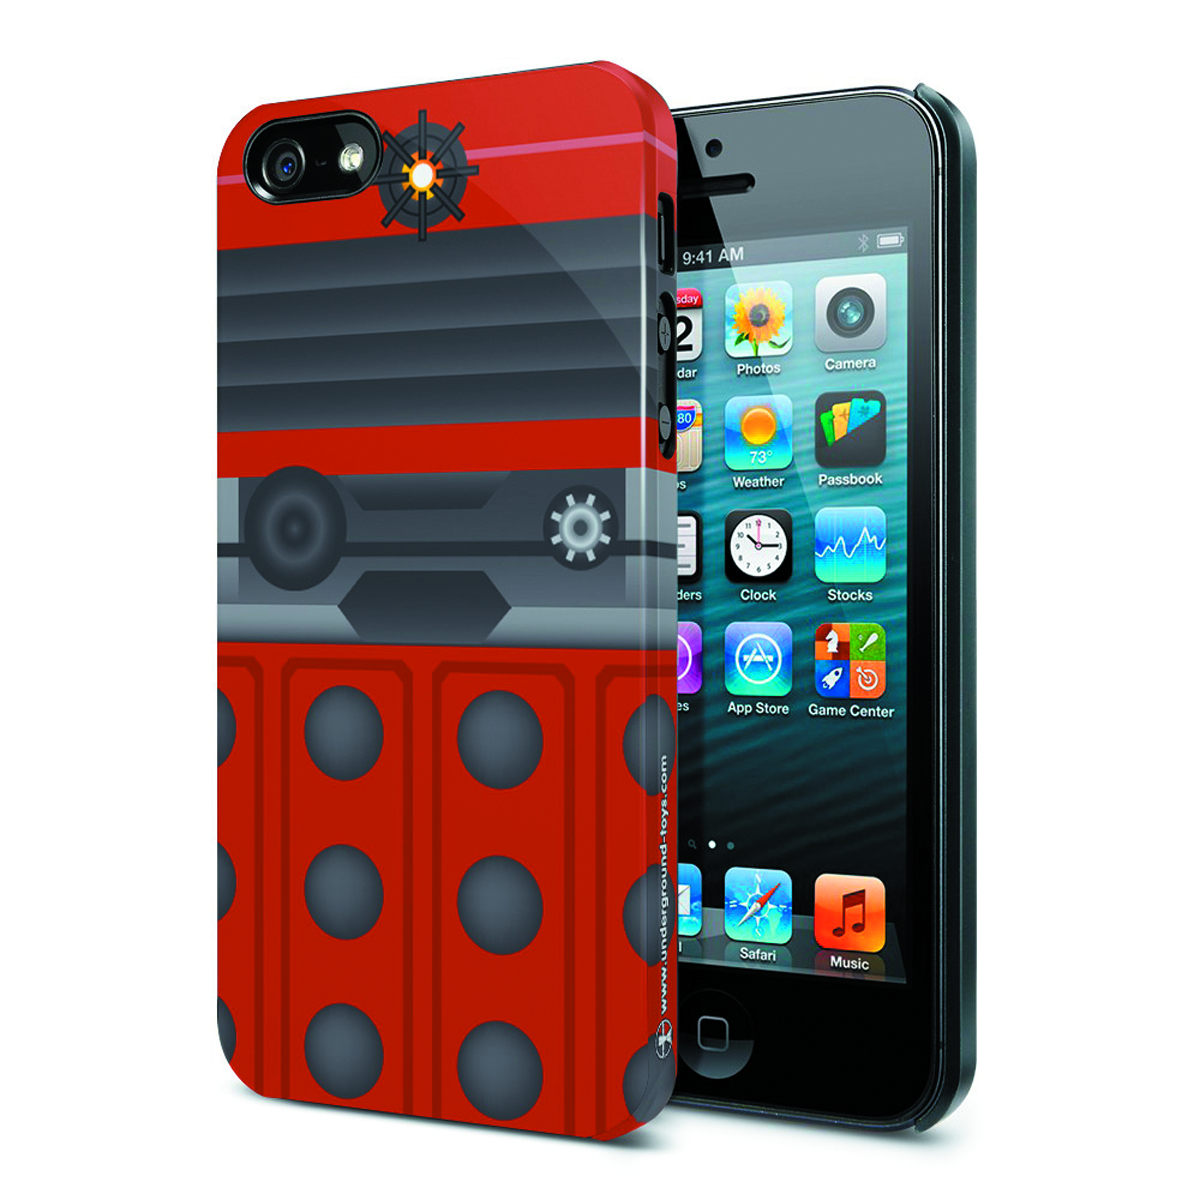 DOCTOR WHO NOT ANOTHER DALEK IPHONE 4 CASE